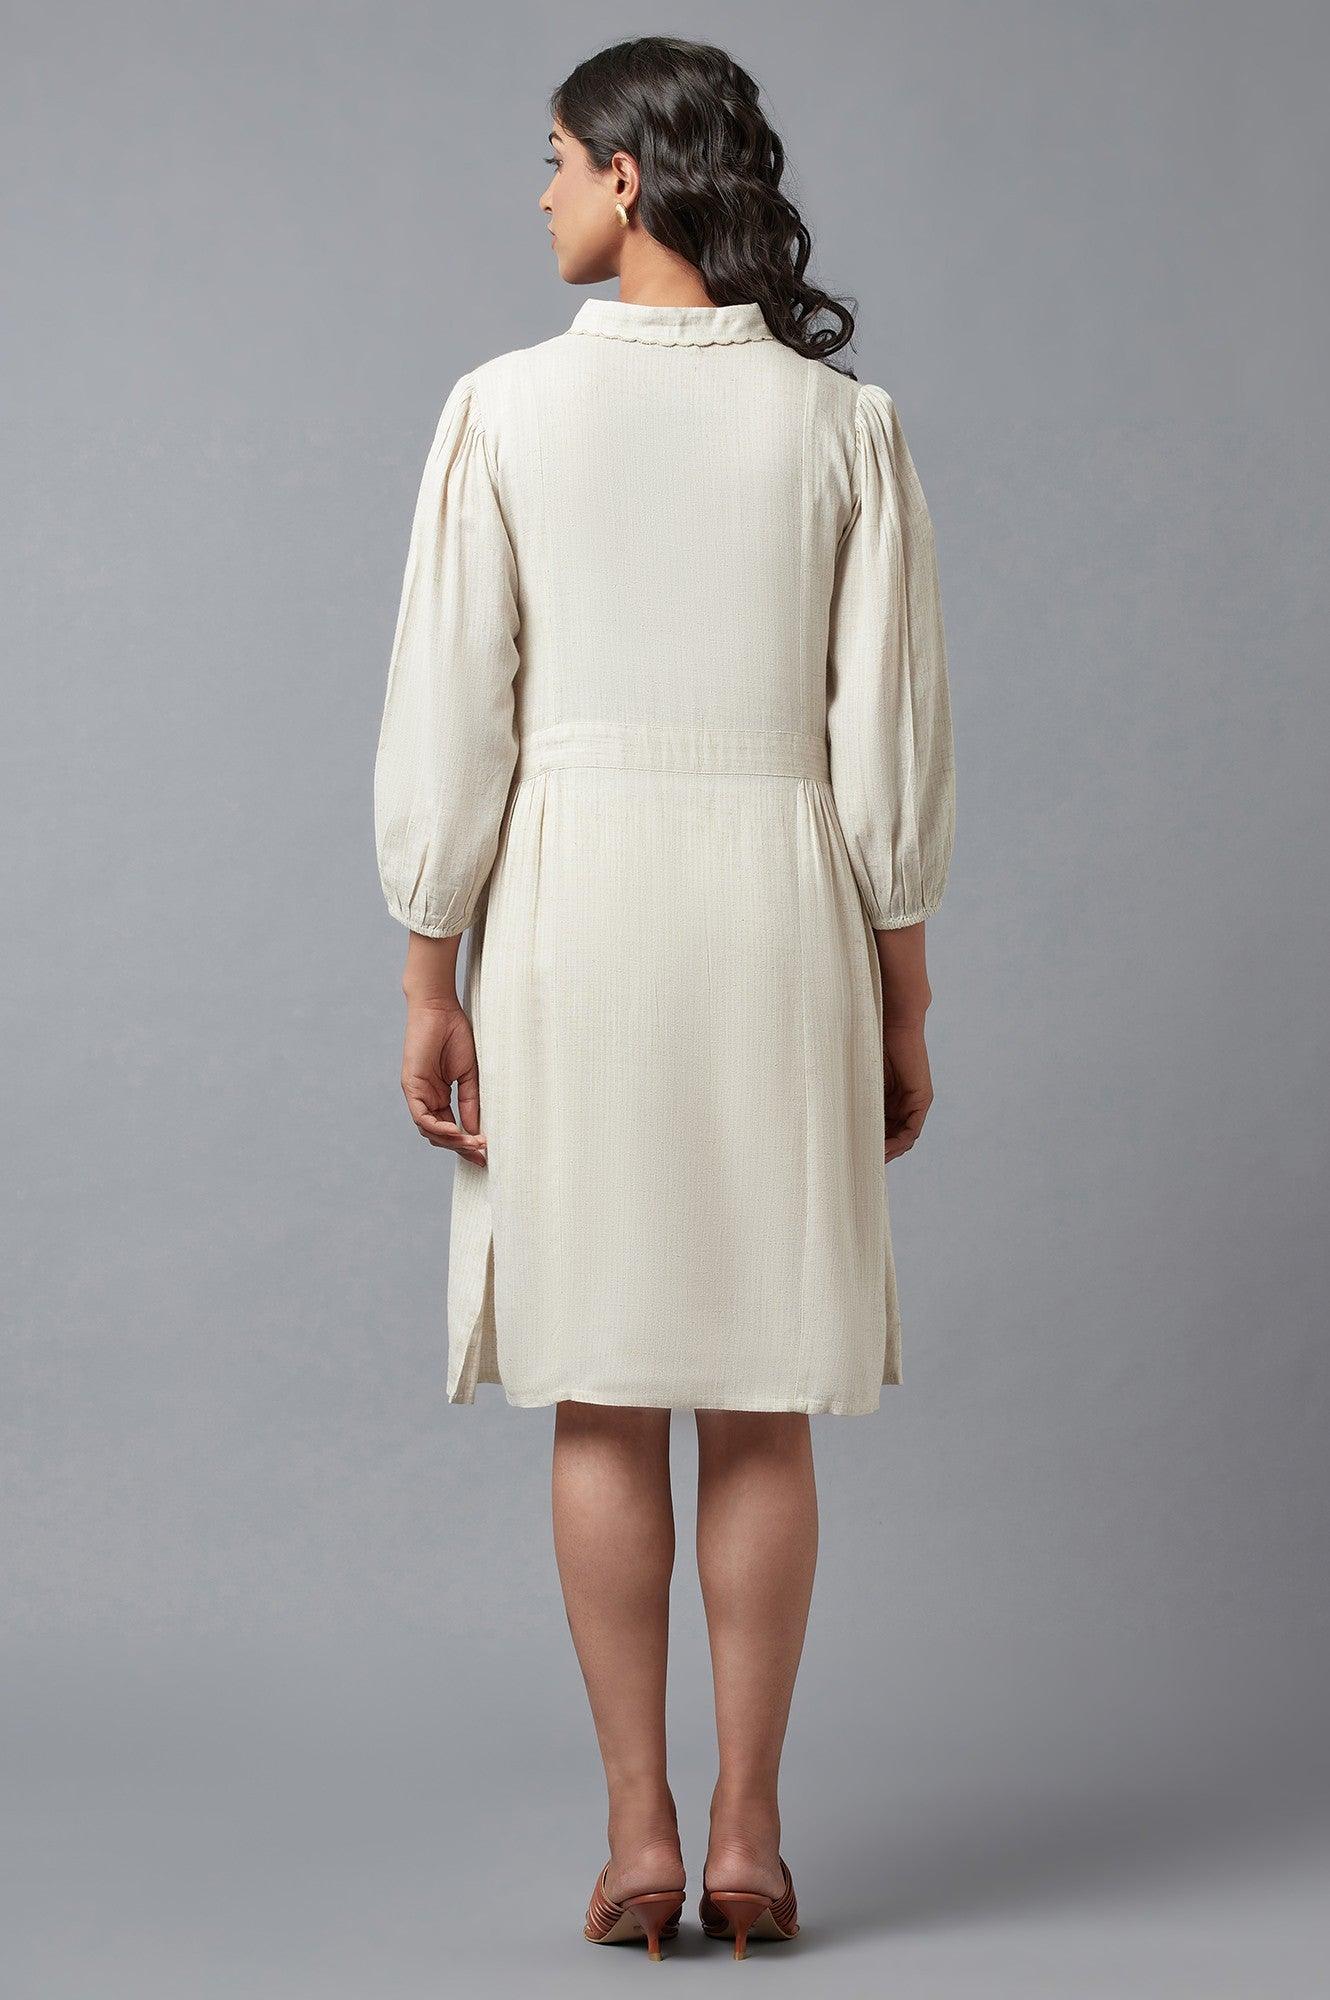 Beige Solid Straight Dress With Thread Embroidery - wforwoman